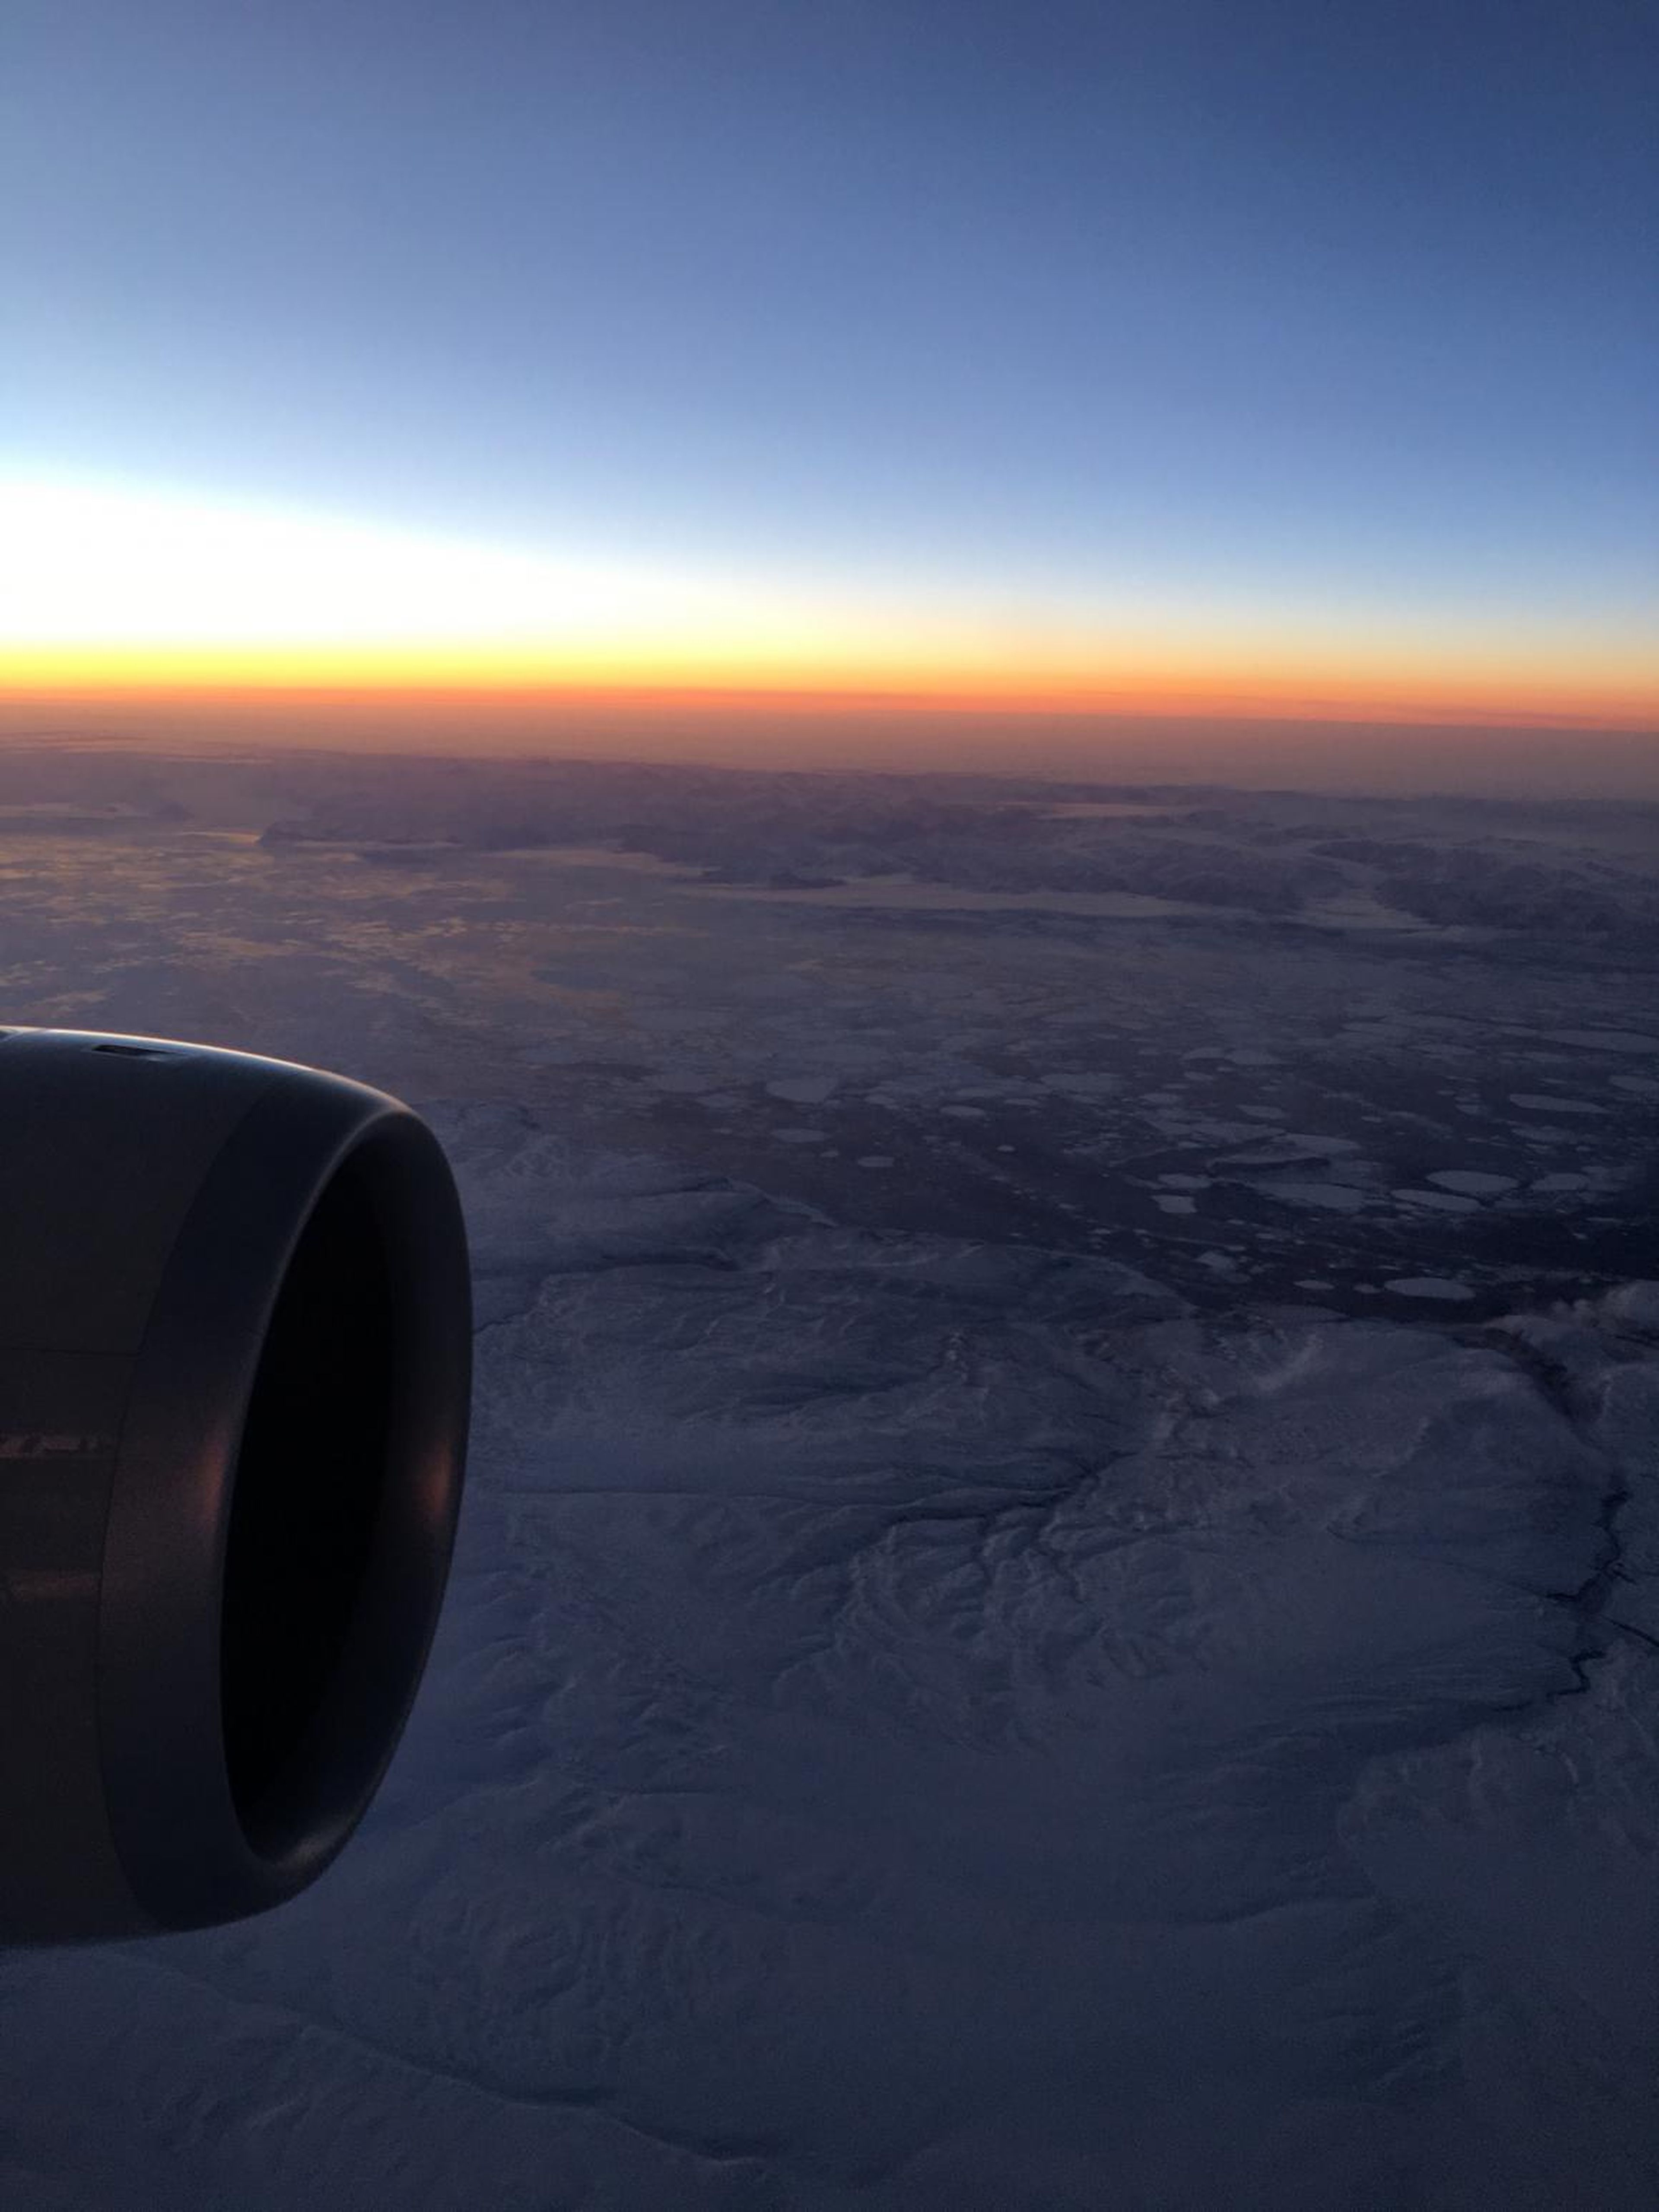 Here's a shot of us flying past the North Pole. Santa is nowhere to be seen.